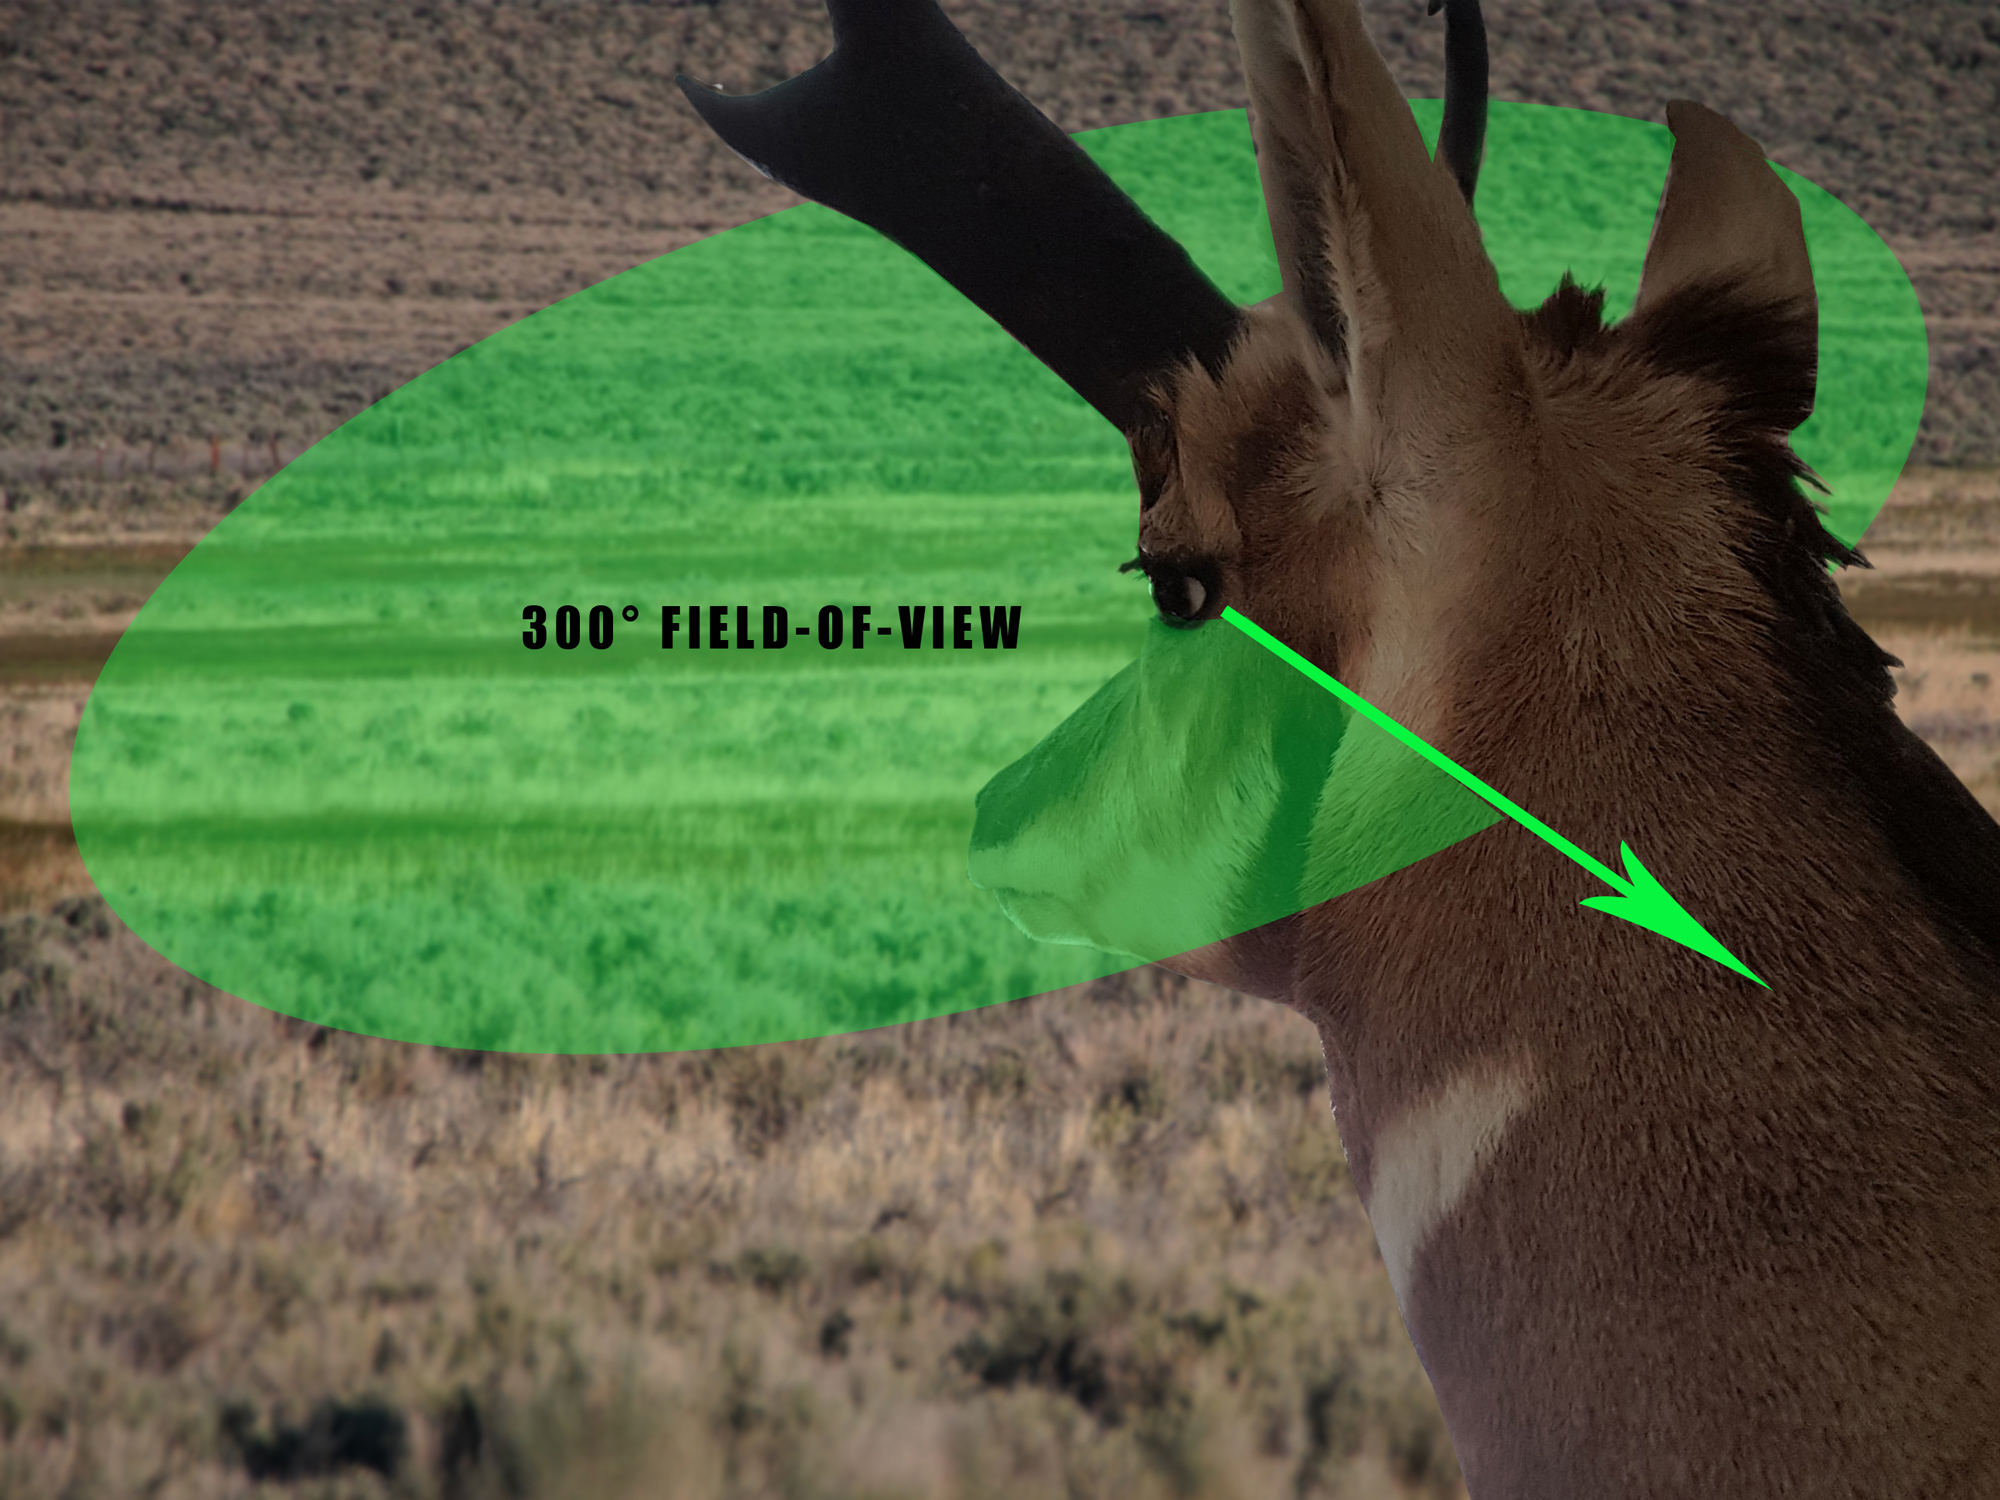 A diagram showing how Antelope have 300 degrees of vision which makes archery stalks hard.